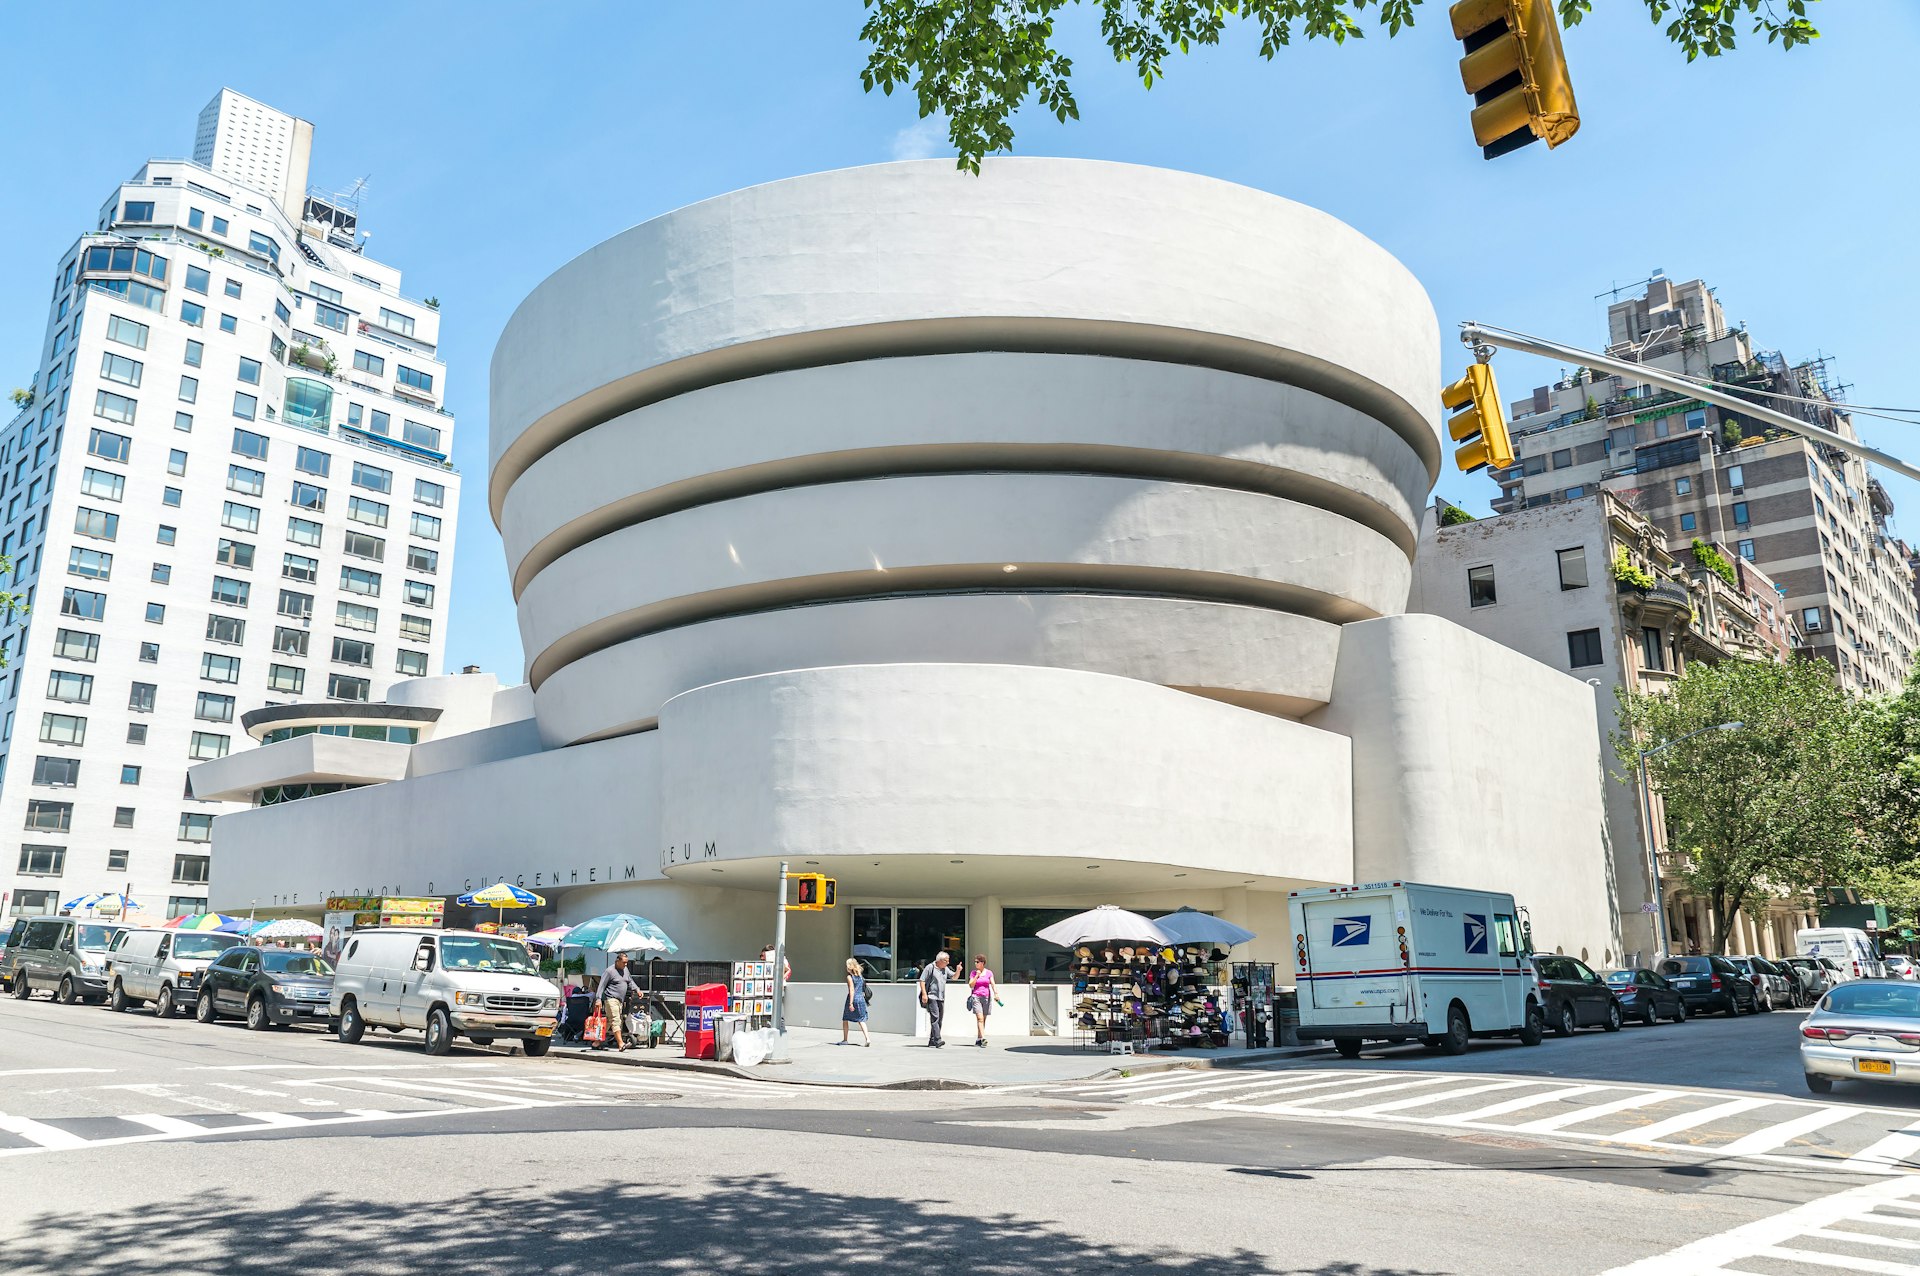 Exterior of the Solomon R. Guggenheim Museum of modern and contemporary art. 